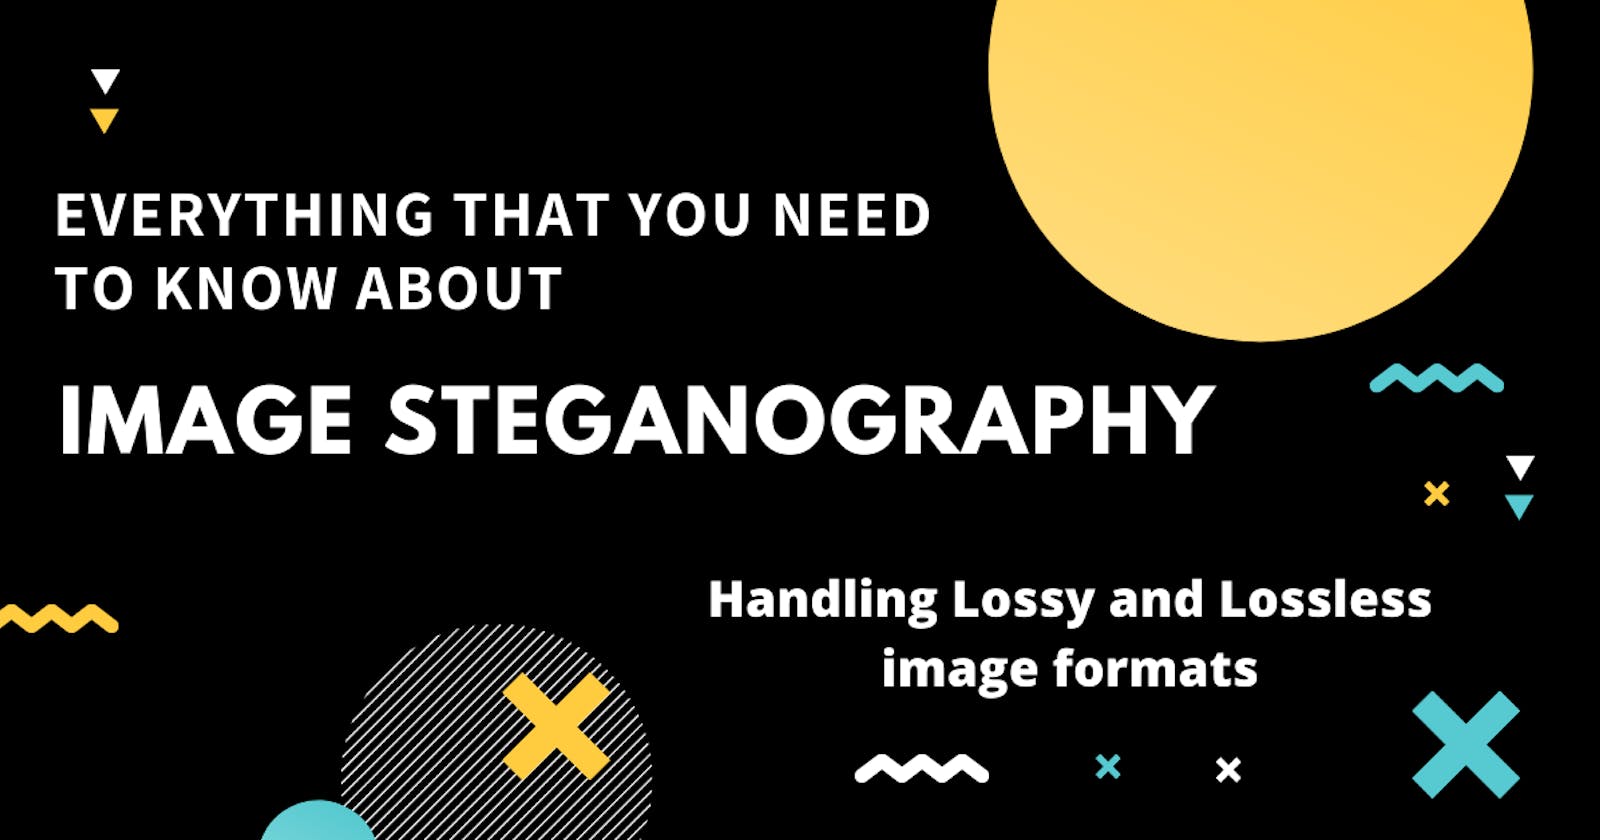 Everything that you need to know about Image Steganography